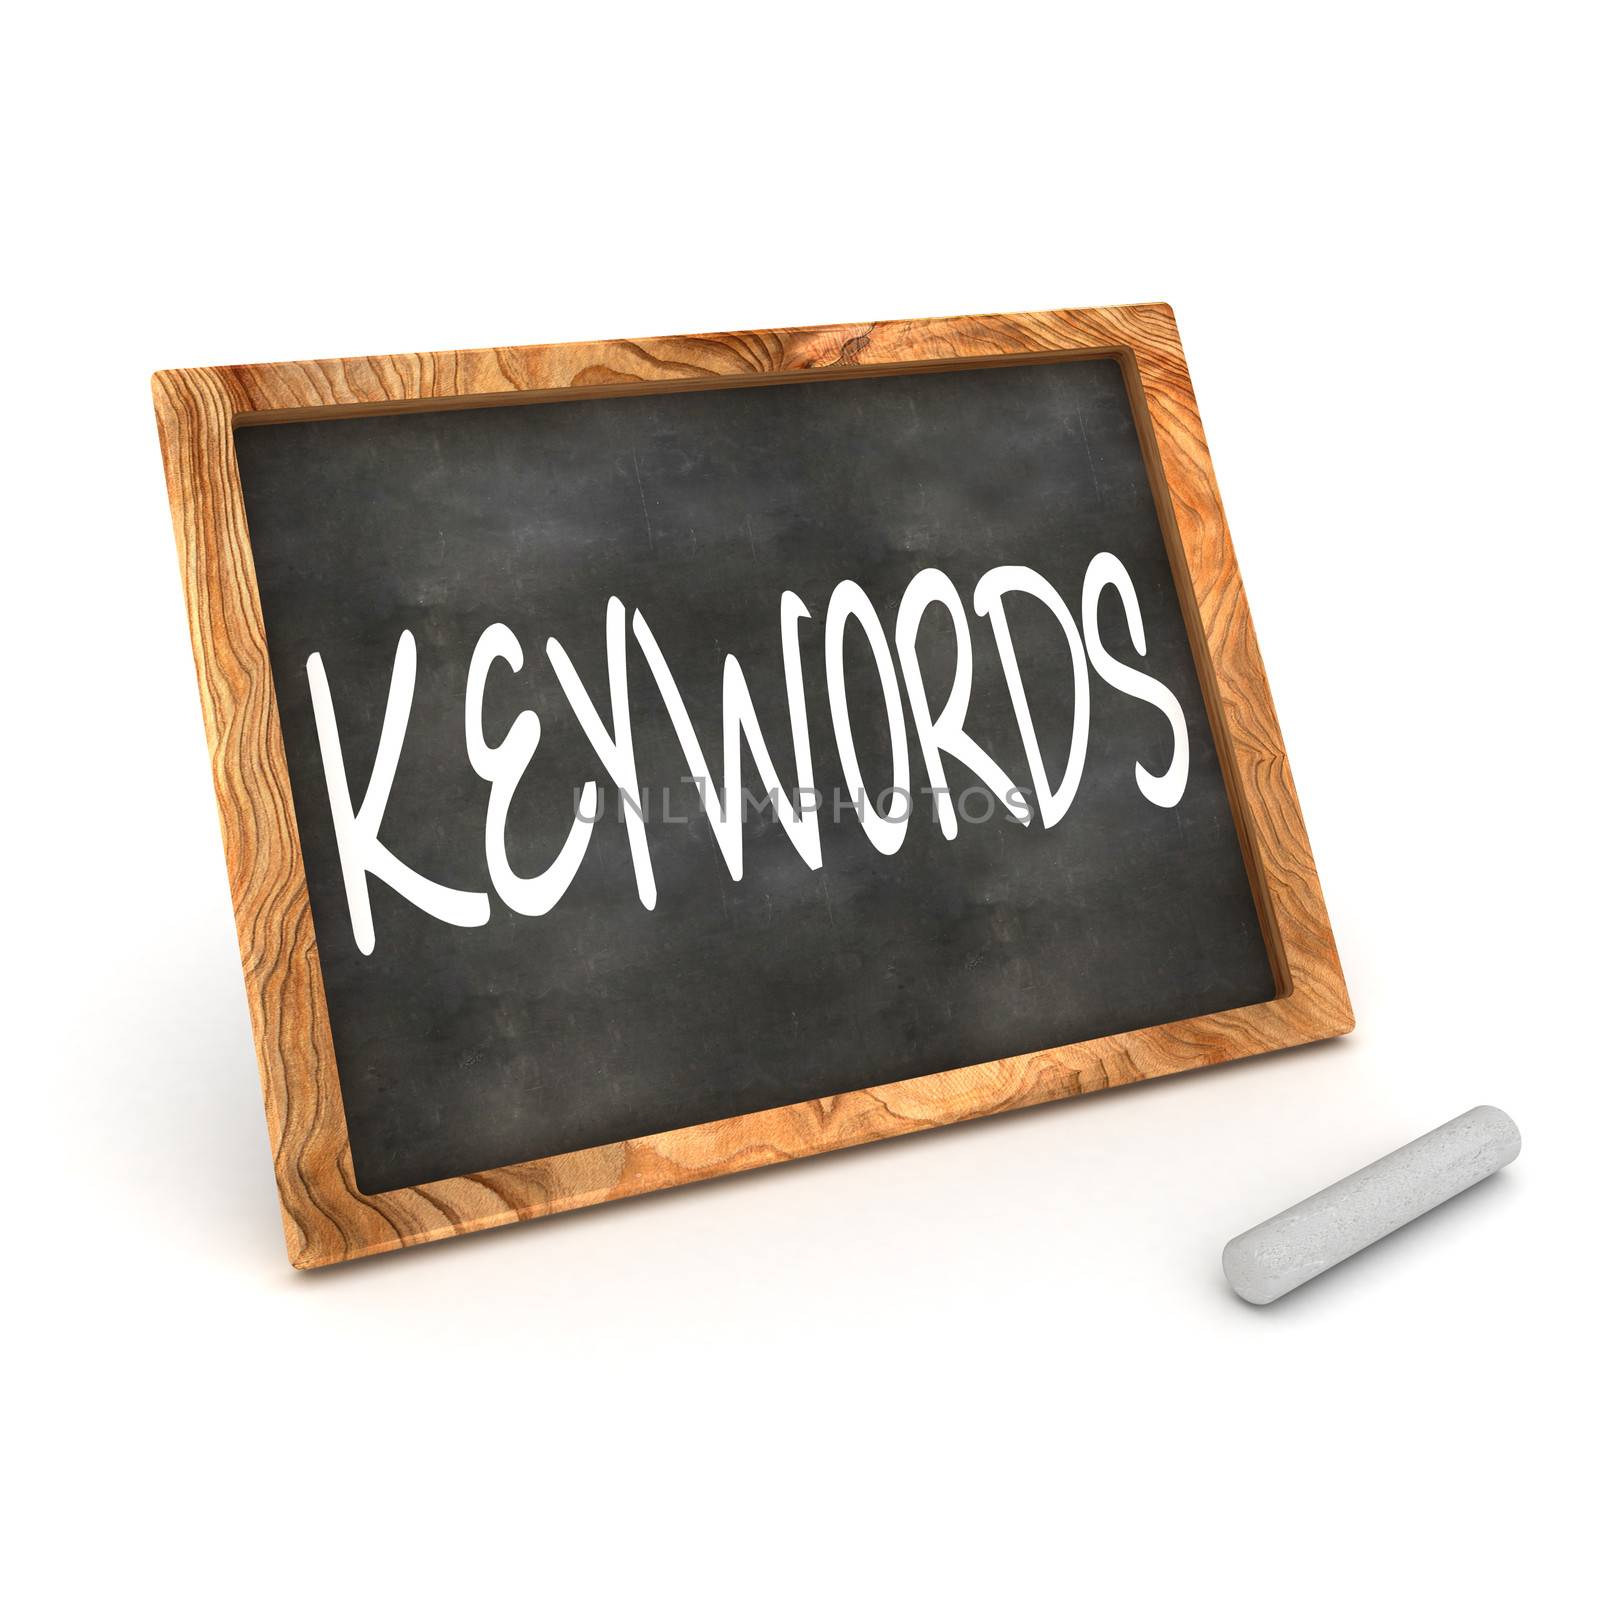 A Colourful 3d Rendered Concept Illustration showing "Keywords" writen on a Blackboard with white chalk